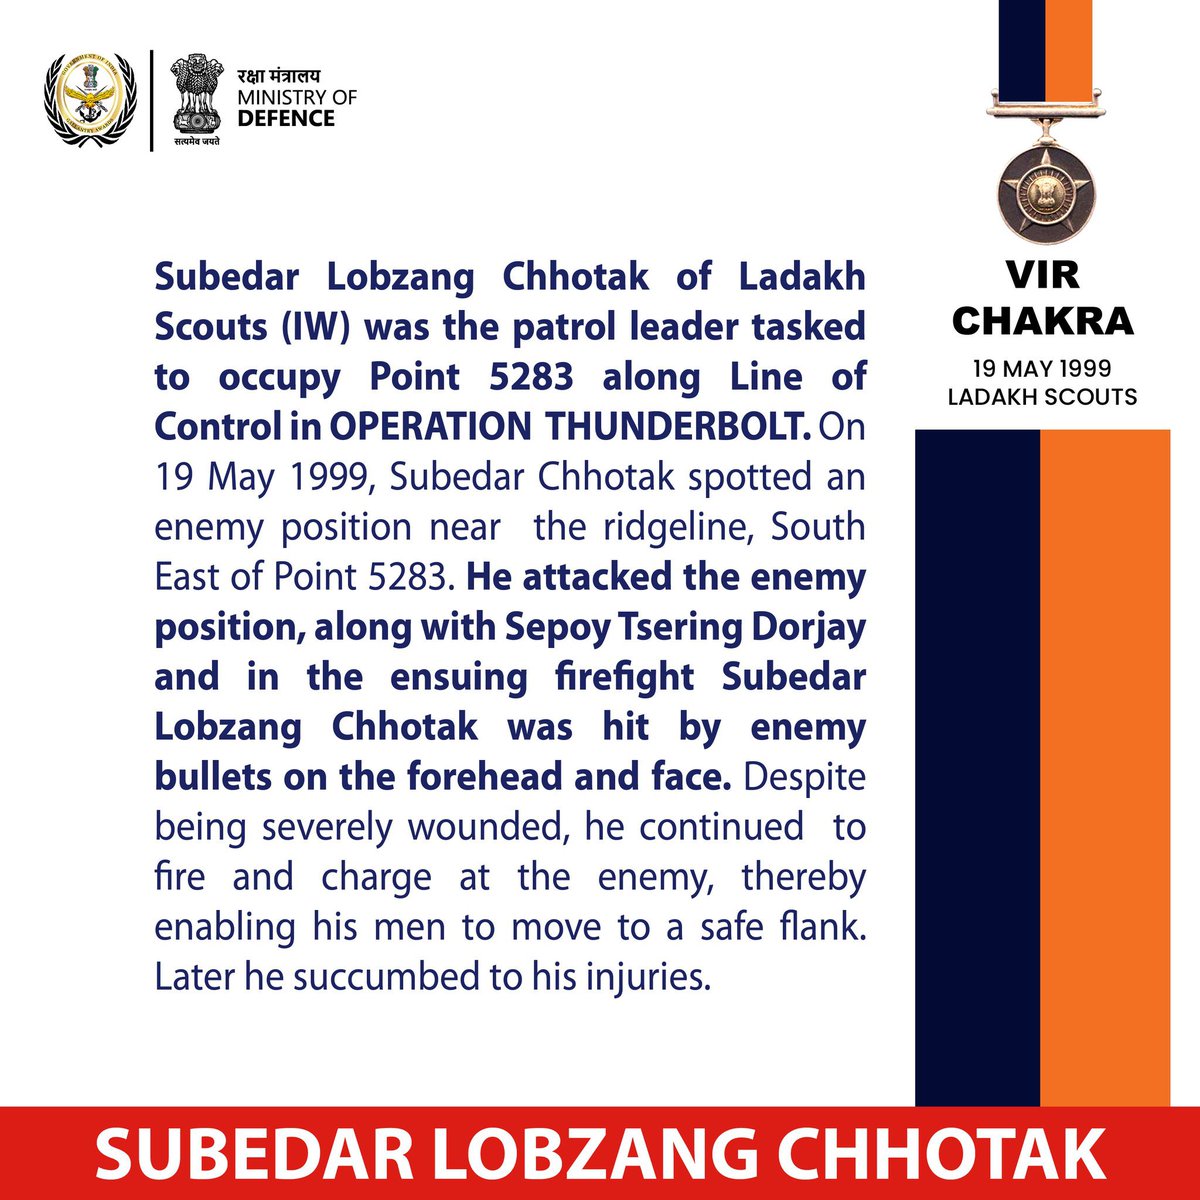 Join me in paying Homage to a Braveheart, SUBEDAR LOBZANG CHHOTAK VIR CHAKRA LADAKH SCOUTS (IW) on his Balidan Diwas today. Sub Chhotak made Supreme Sacrifice displaying indomitable courage #OnThisDay 19 May, 1999 at #Pt5283 during #OperationThunderbolt. #KnowYourHeroes